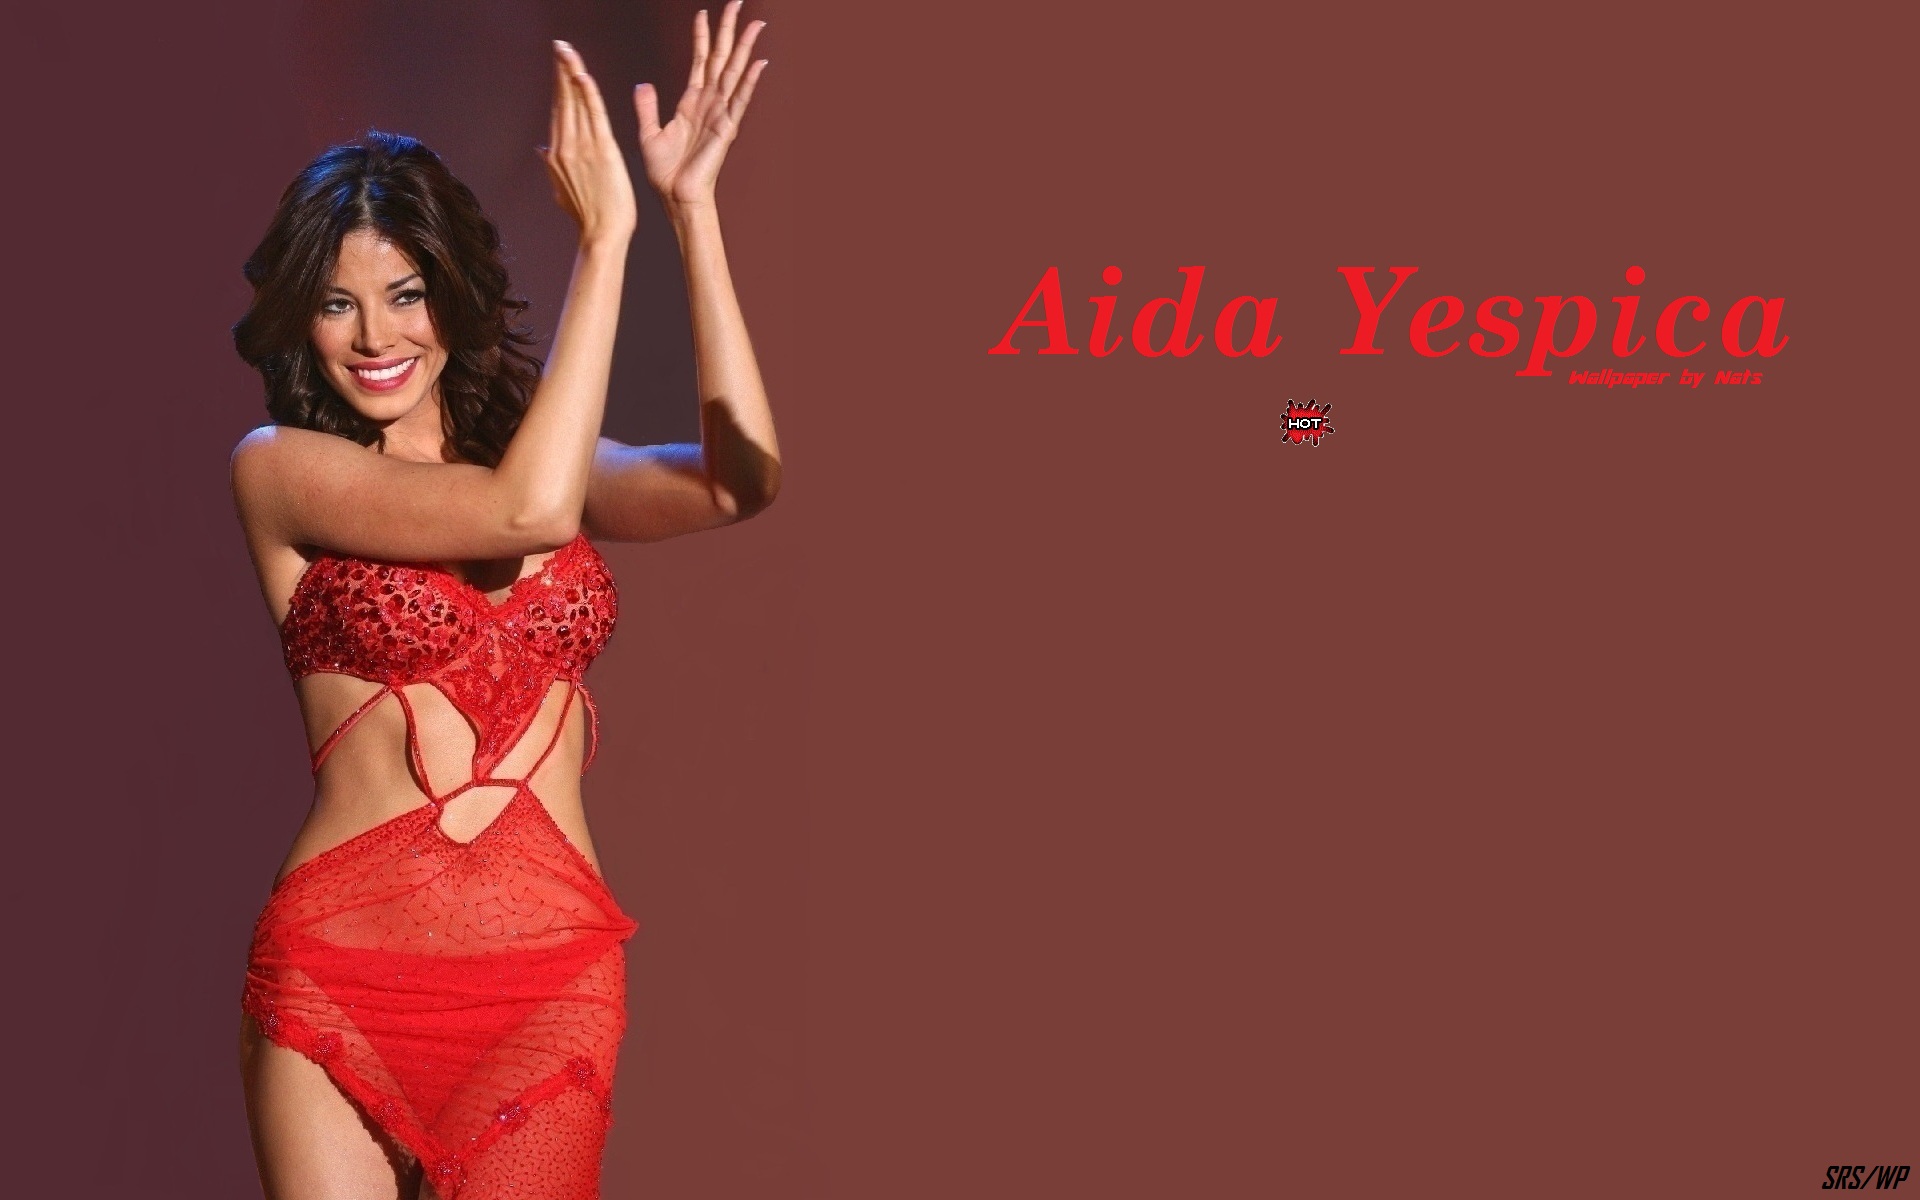 Download High quality Aida Yespica wallpaper / Celebrities Female / 1920x1200